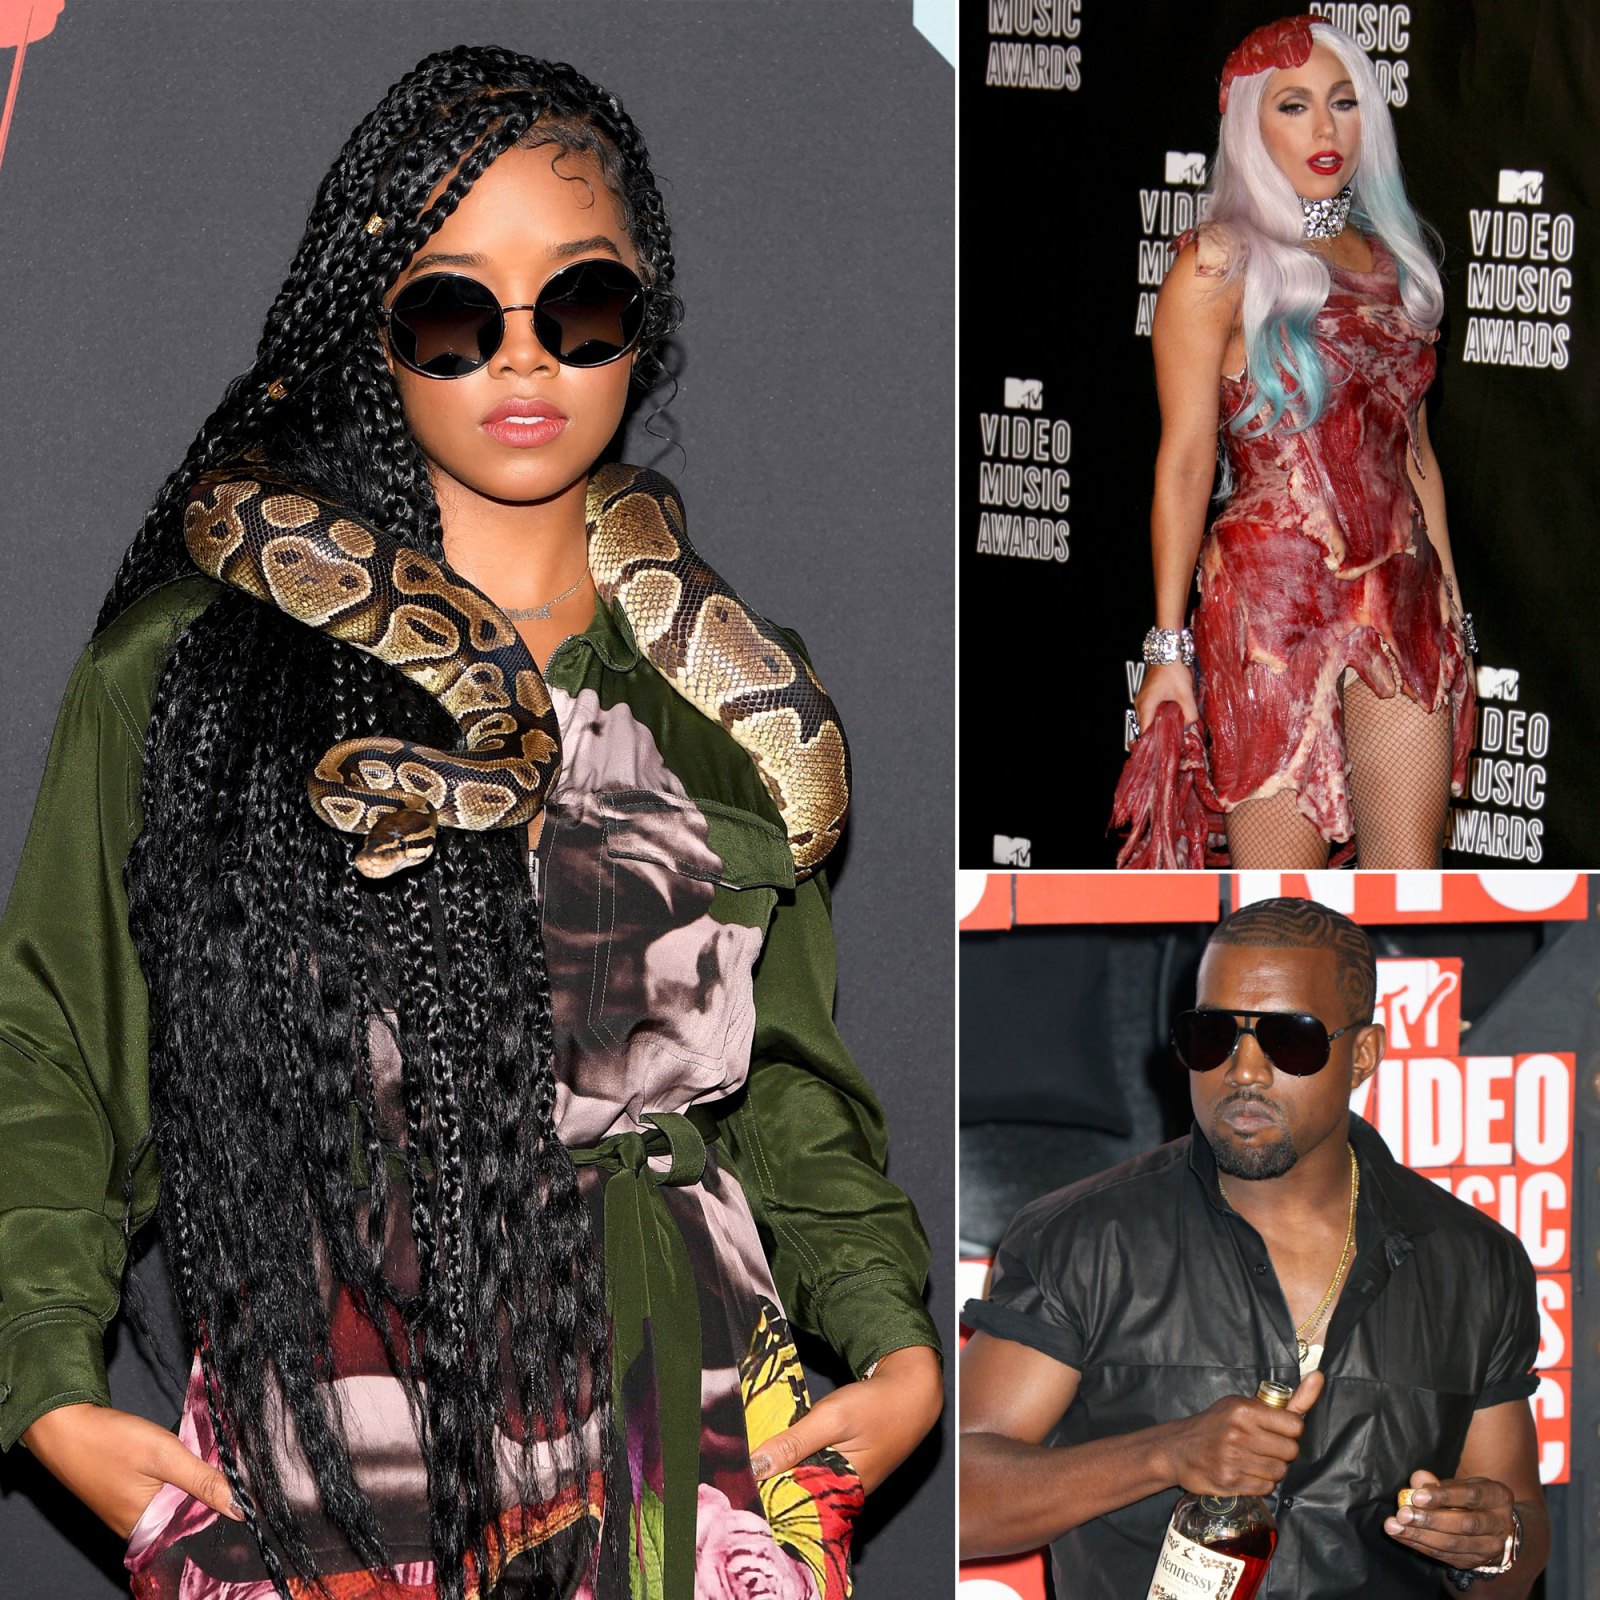 From Snakes to Meat Purses, See the All-Time Craziest VMAs Accessories